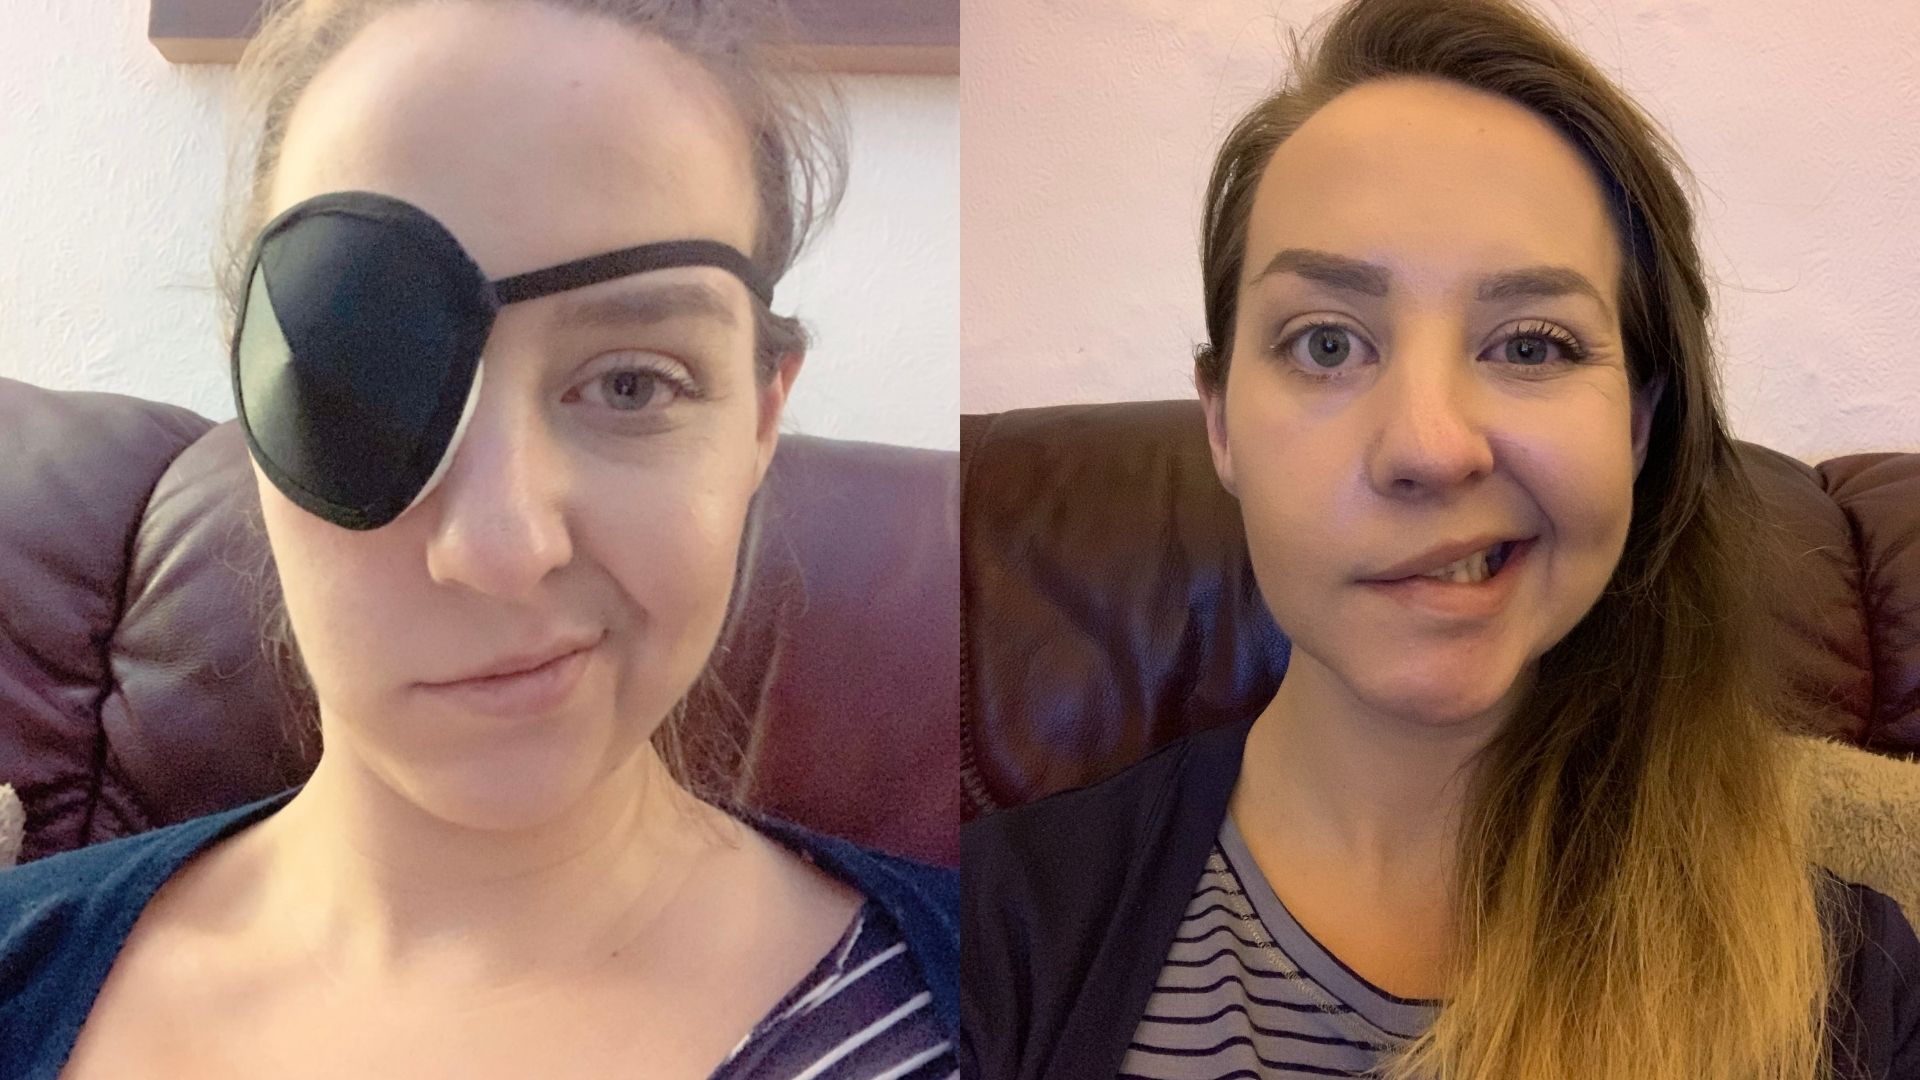 Left: Nicoya, a white woman in her 30s who has brown hair and right sided facial paralysis. She's wearing a black eye patch and looking at the camera. Right: Nicoya is wearing a striped grey t-shirt and black cardigan and looking at the camera.